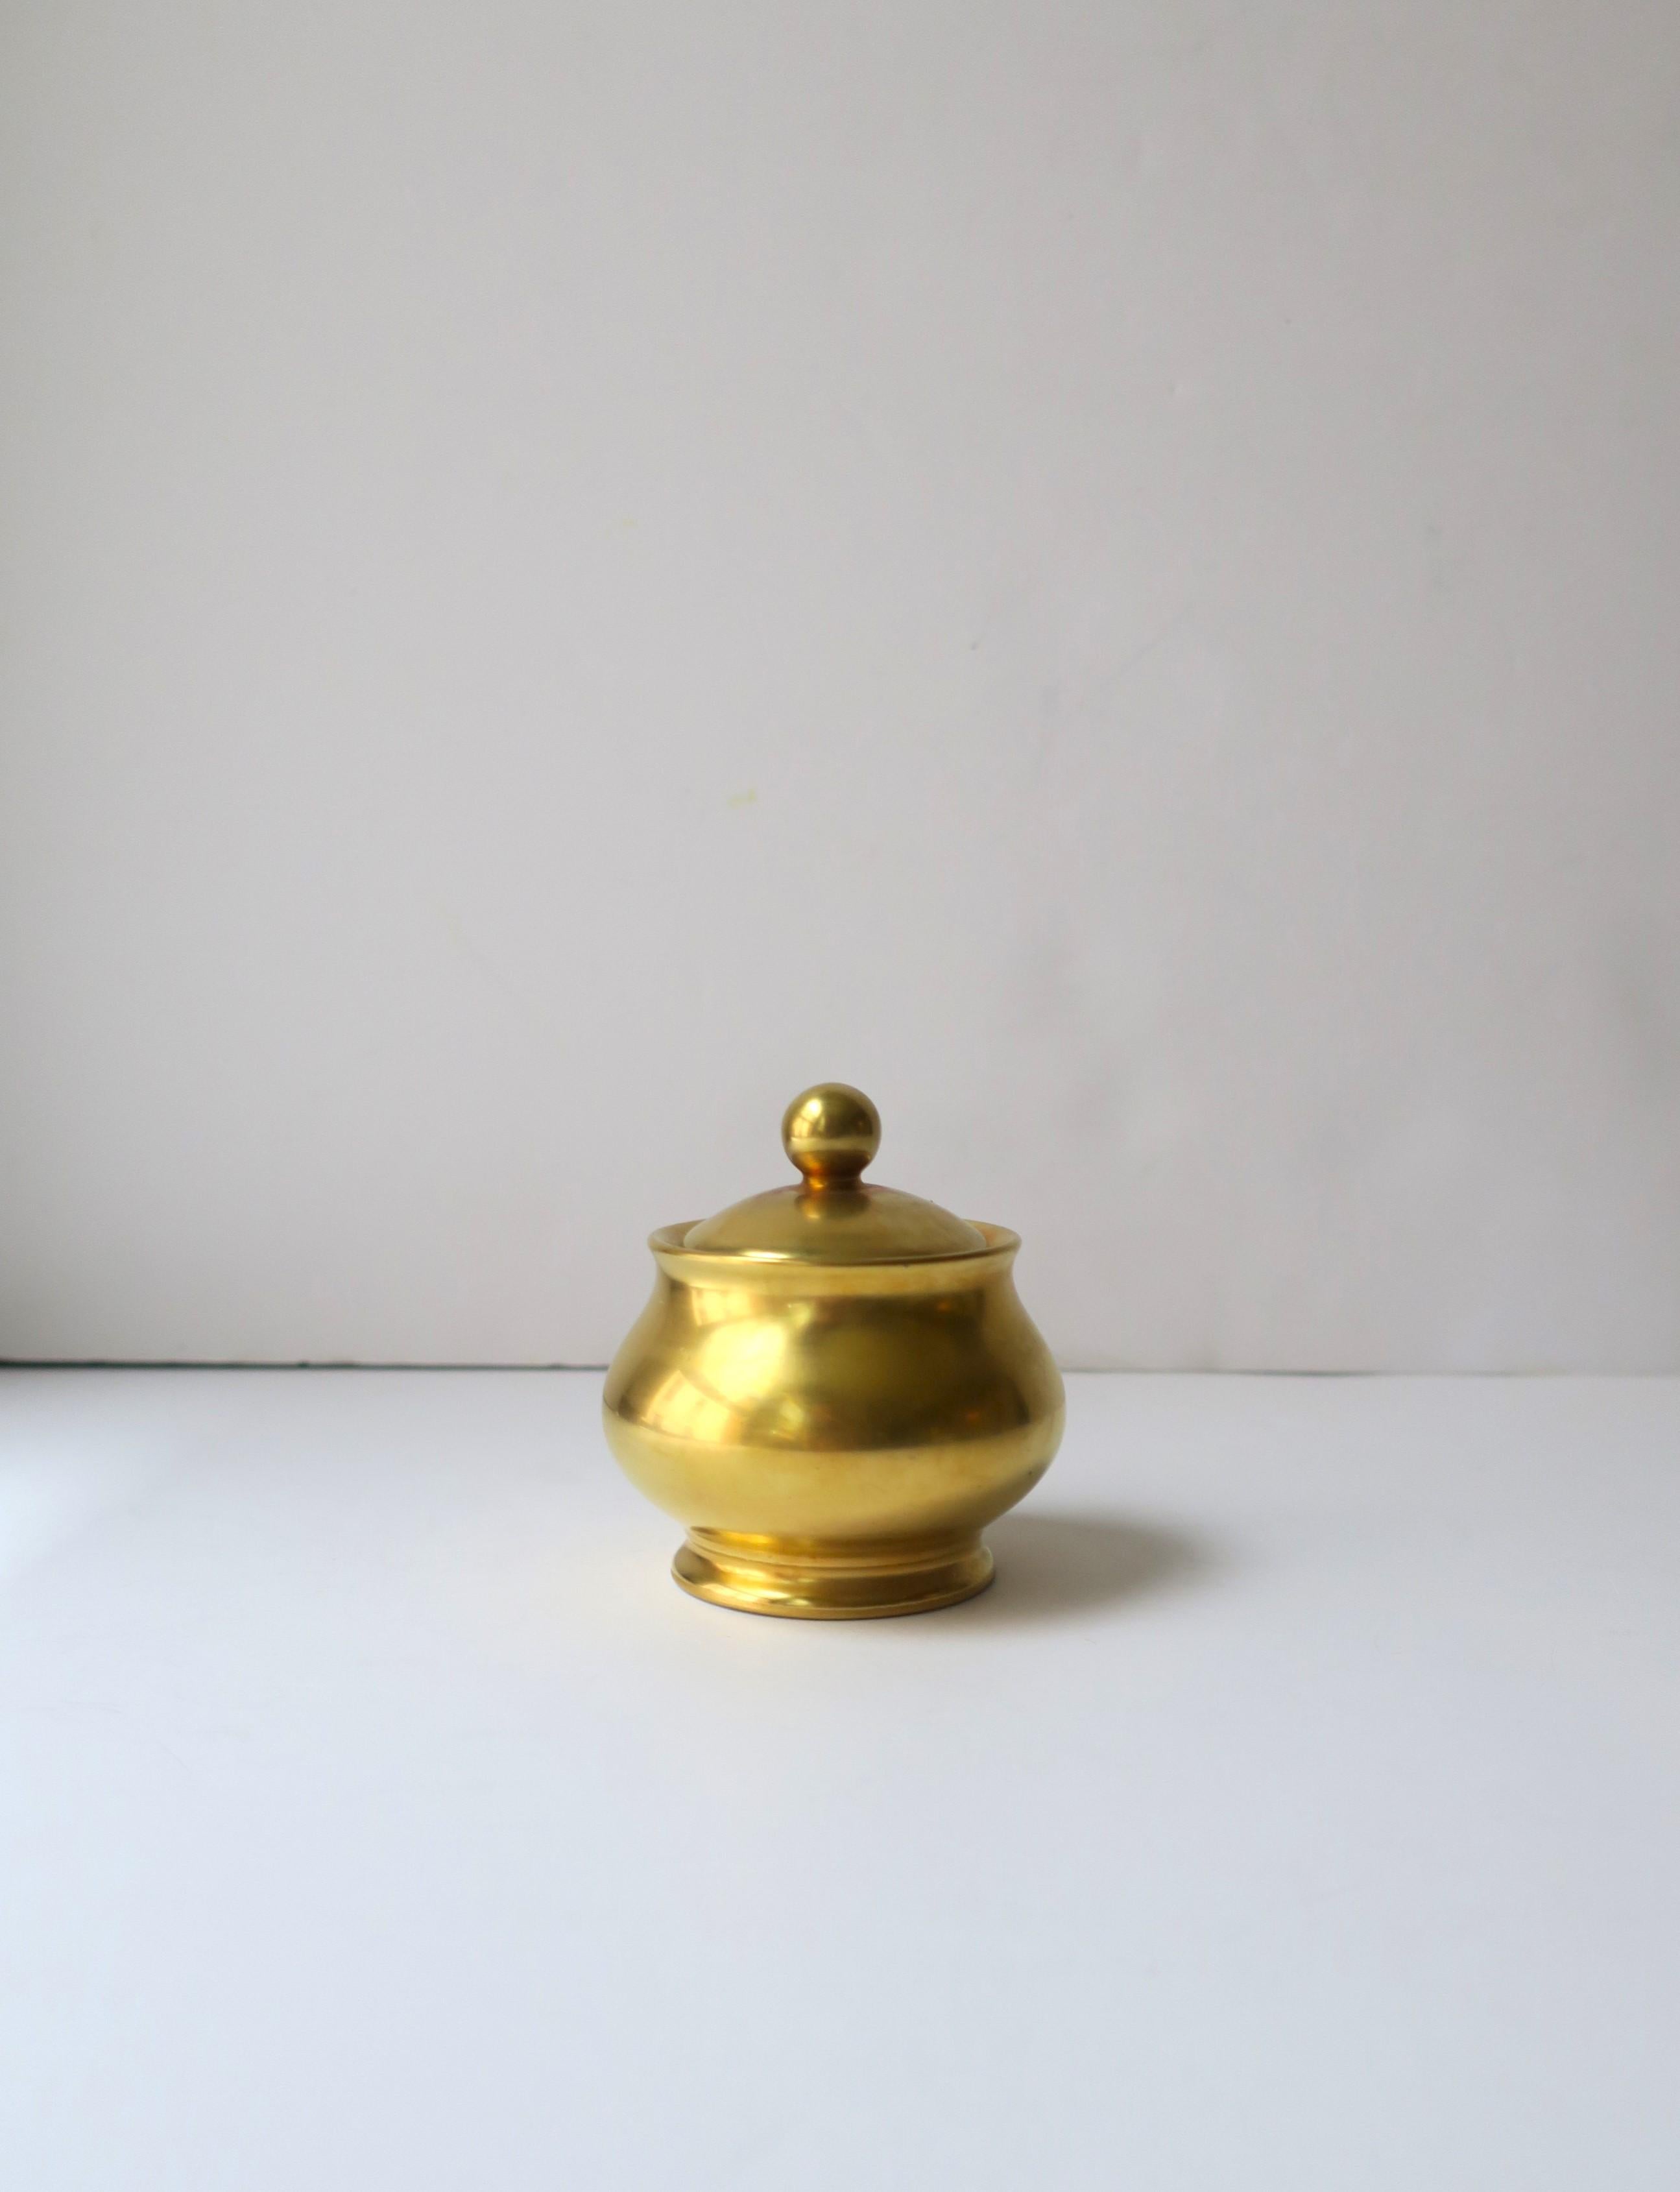 A beautiful gold Japanese porcelain condiments or sugar bowl and lid, circa early-21st century, Japan. Japan is known for its fine porcelain. Piece was made exclusively for Takashimaya Fifth Avenue, New York. Piece is covered in a rich gold satin